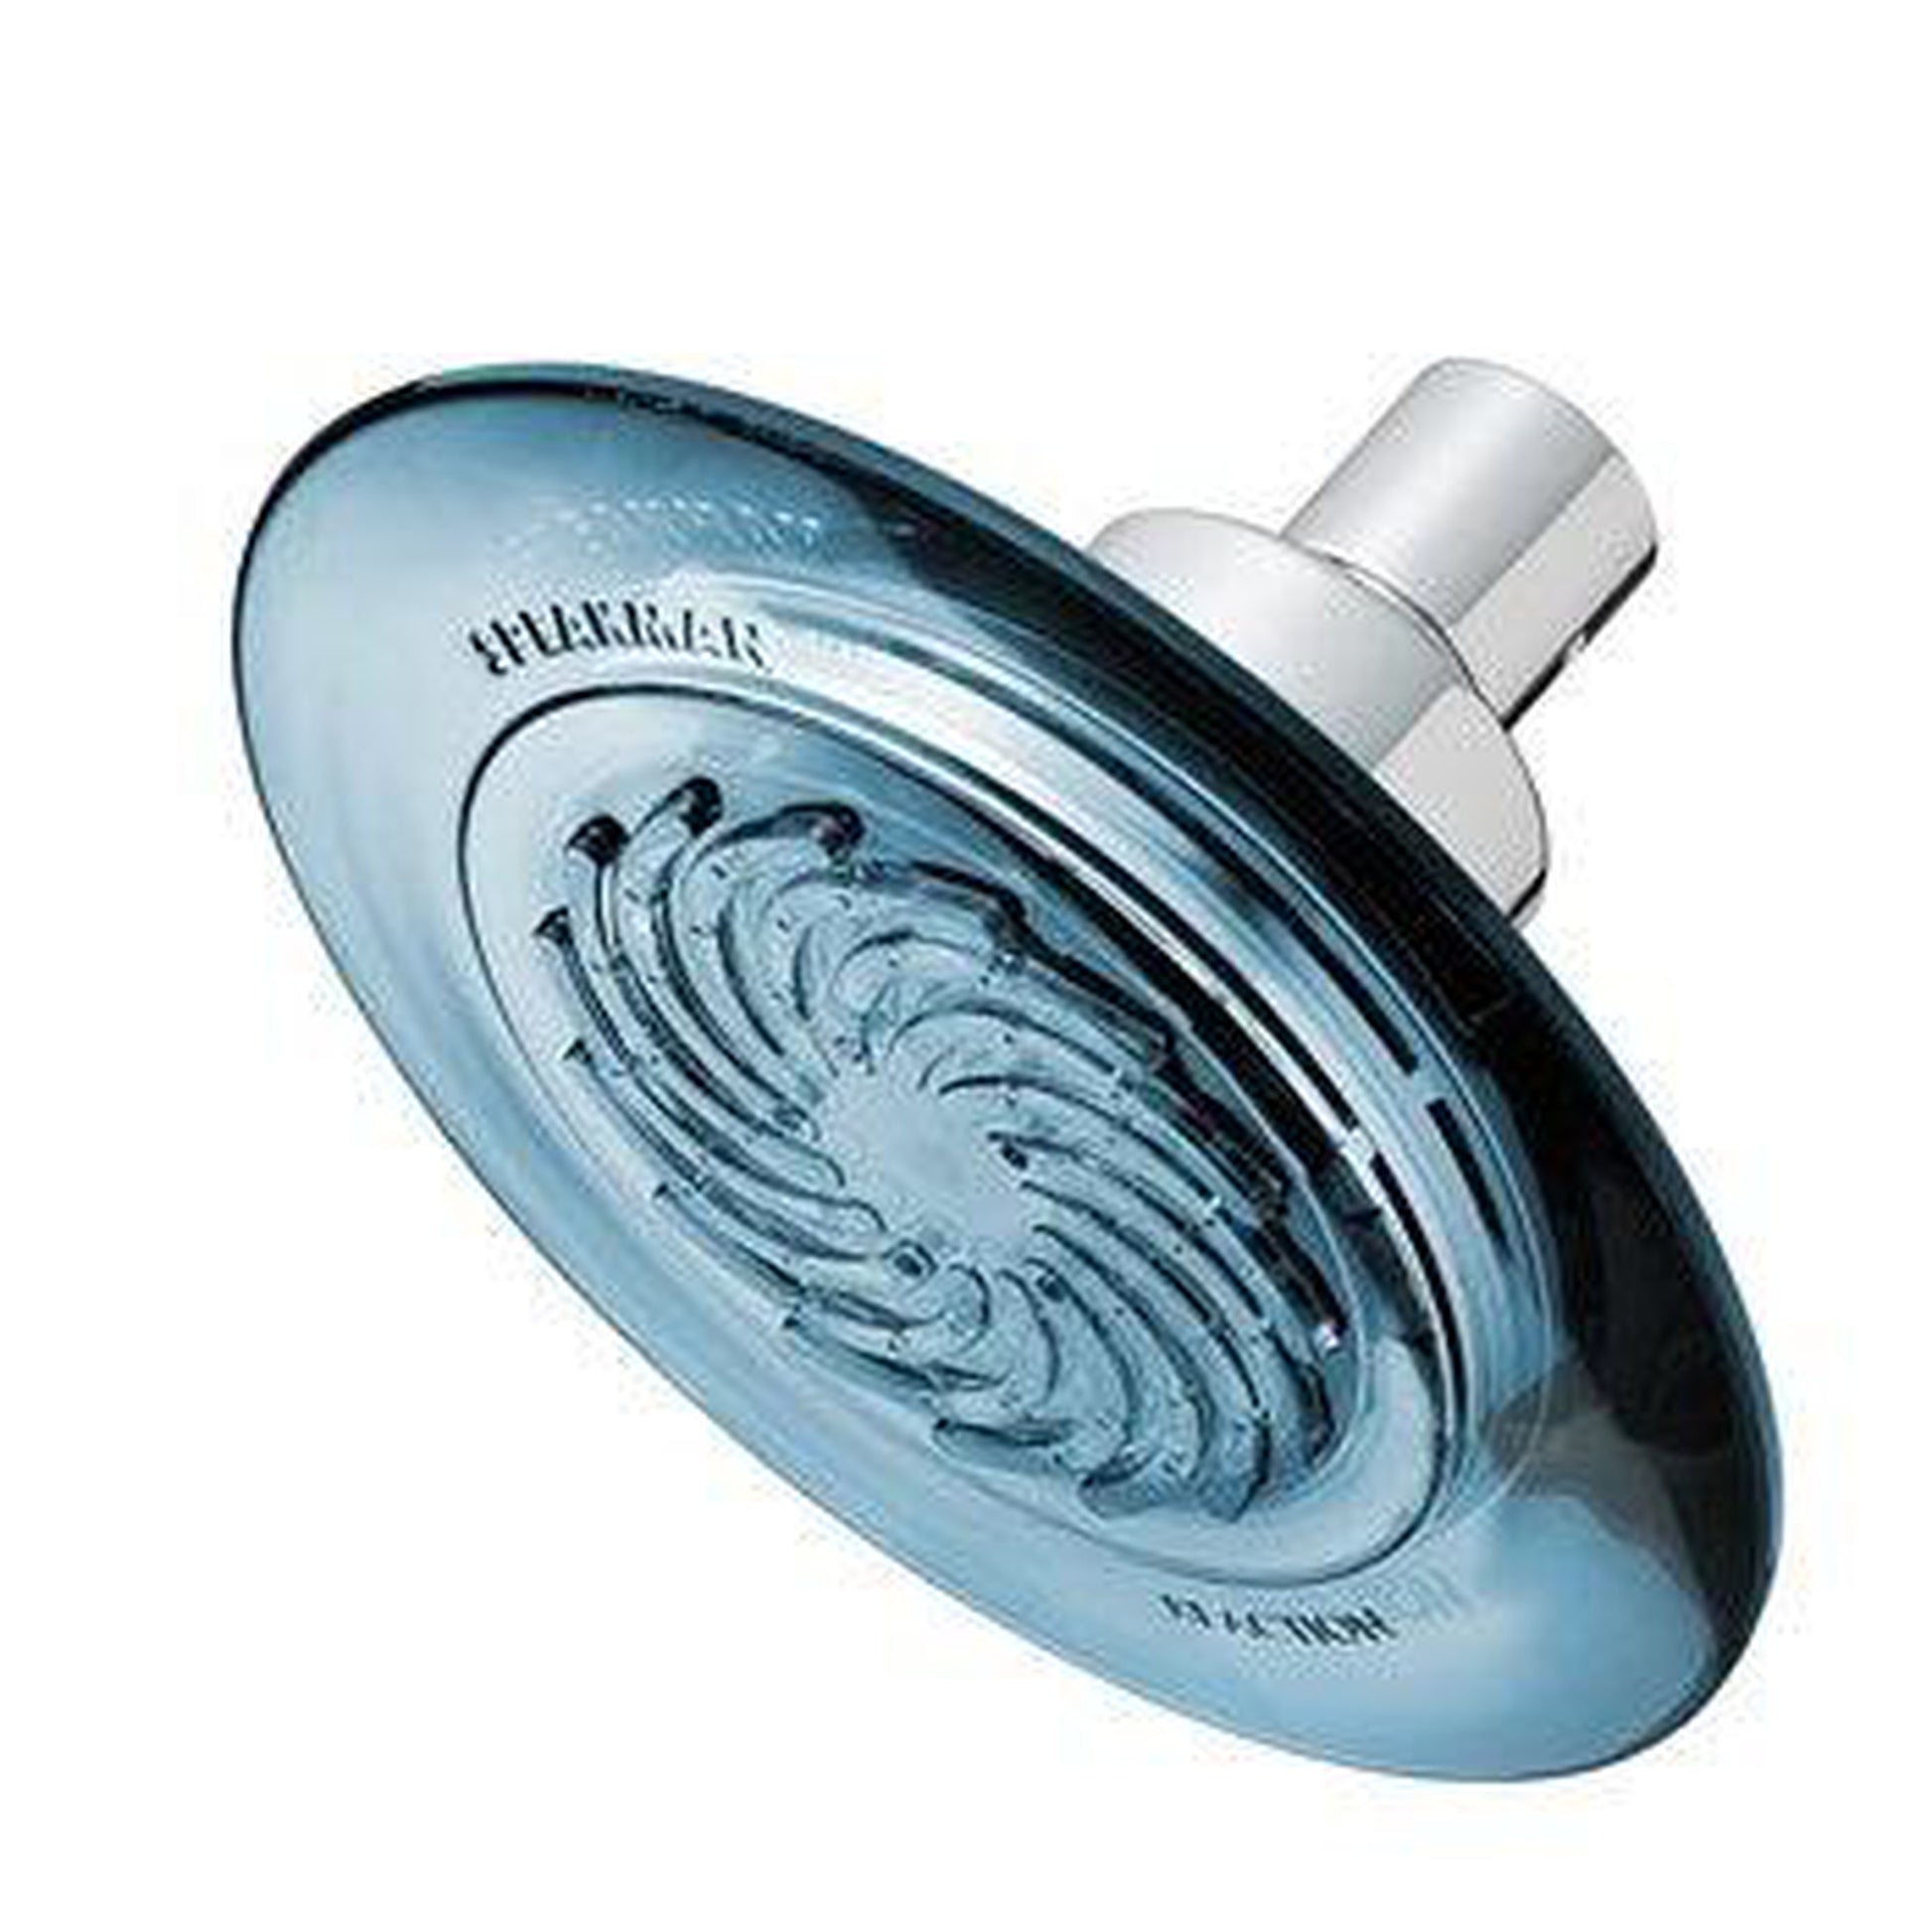 Speakman Reaction Blue and Polished Chrome Single-Function Spray Pattern 1.75 GPM Shower Head